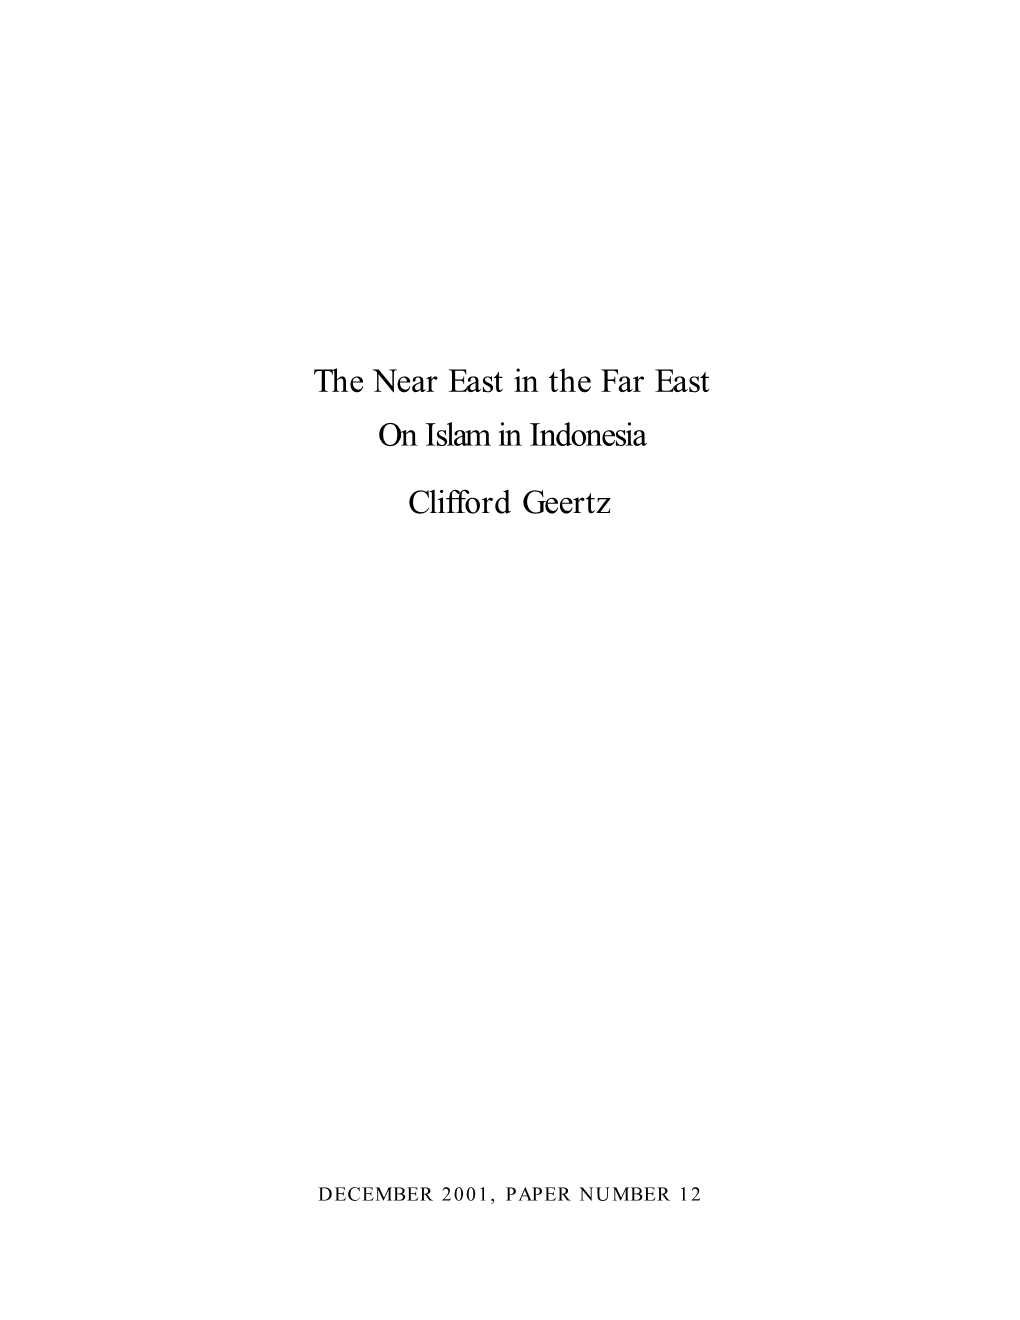 The Near East in the Far East on Islam in Indonesia Clifford Geertz